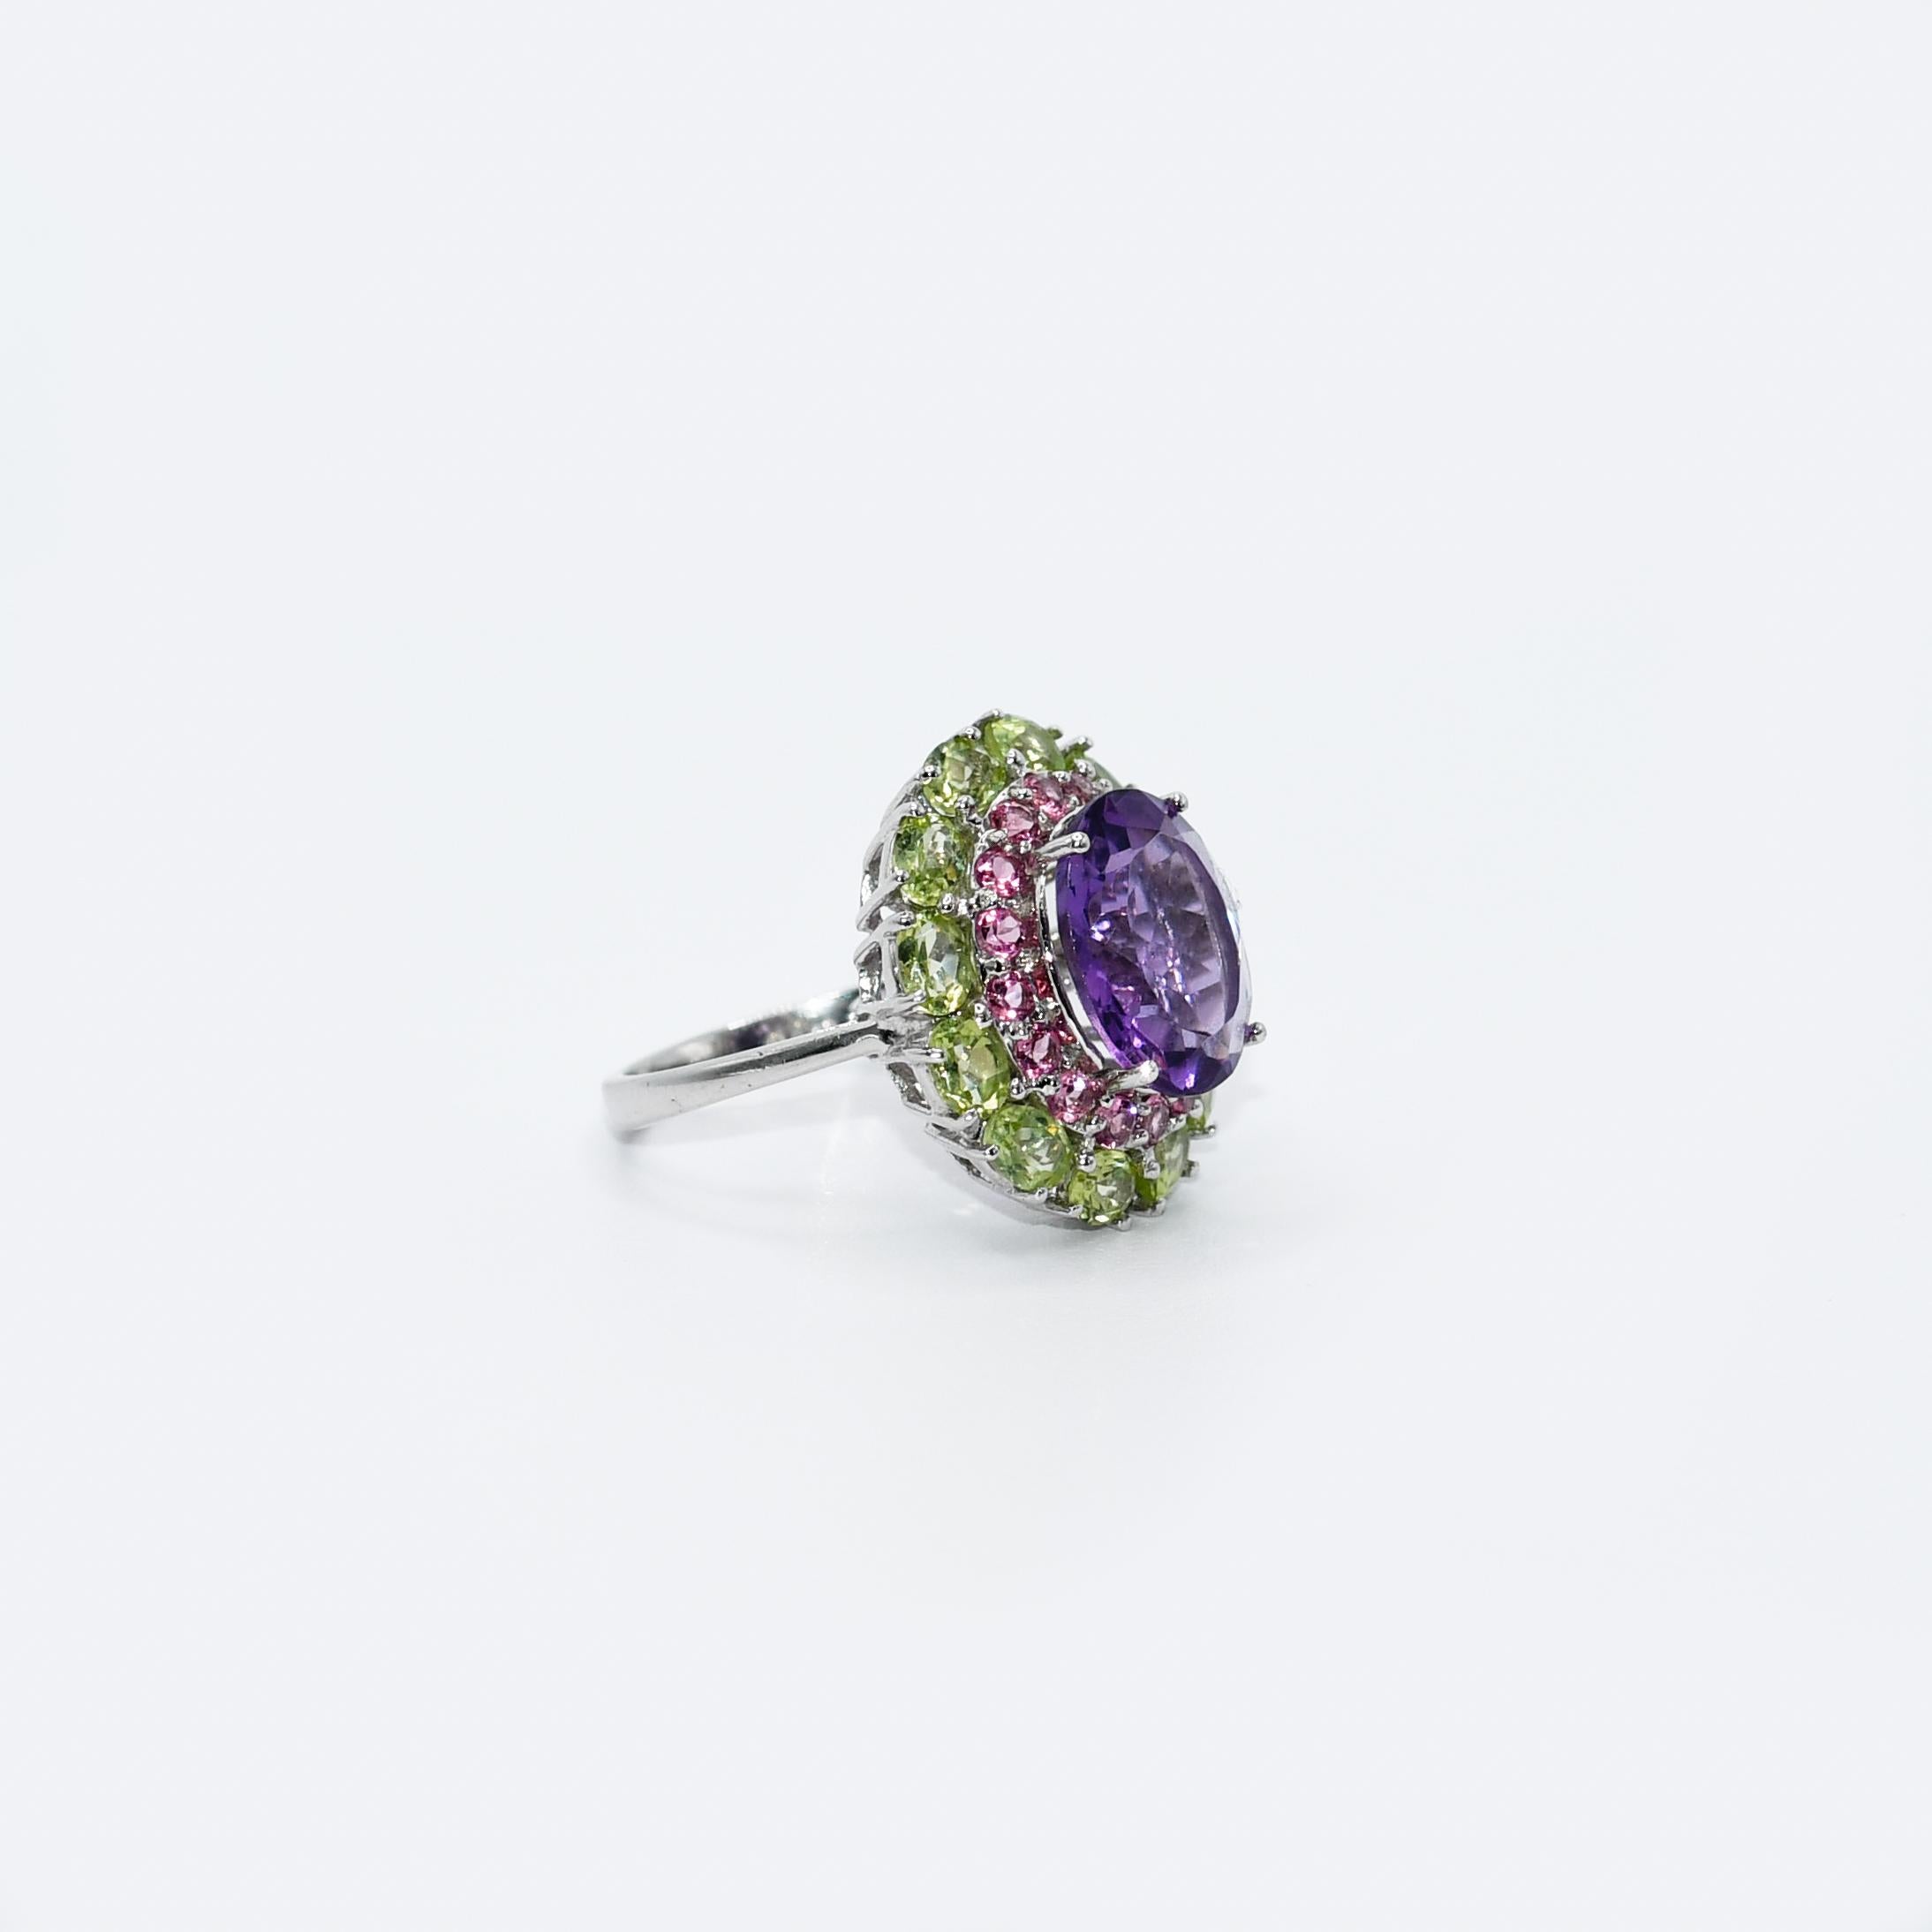 Ladies amethyst and pink tourmaline ring in 10k white gold setting.
Stamped 10k and weighs 5.4 grams gross weight.
The center stone is an oval-shaped, purple amethyst, 3.50 carats.
On the sides are round brilliant cut, pink tourmalines, .50 total